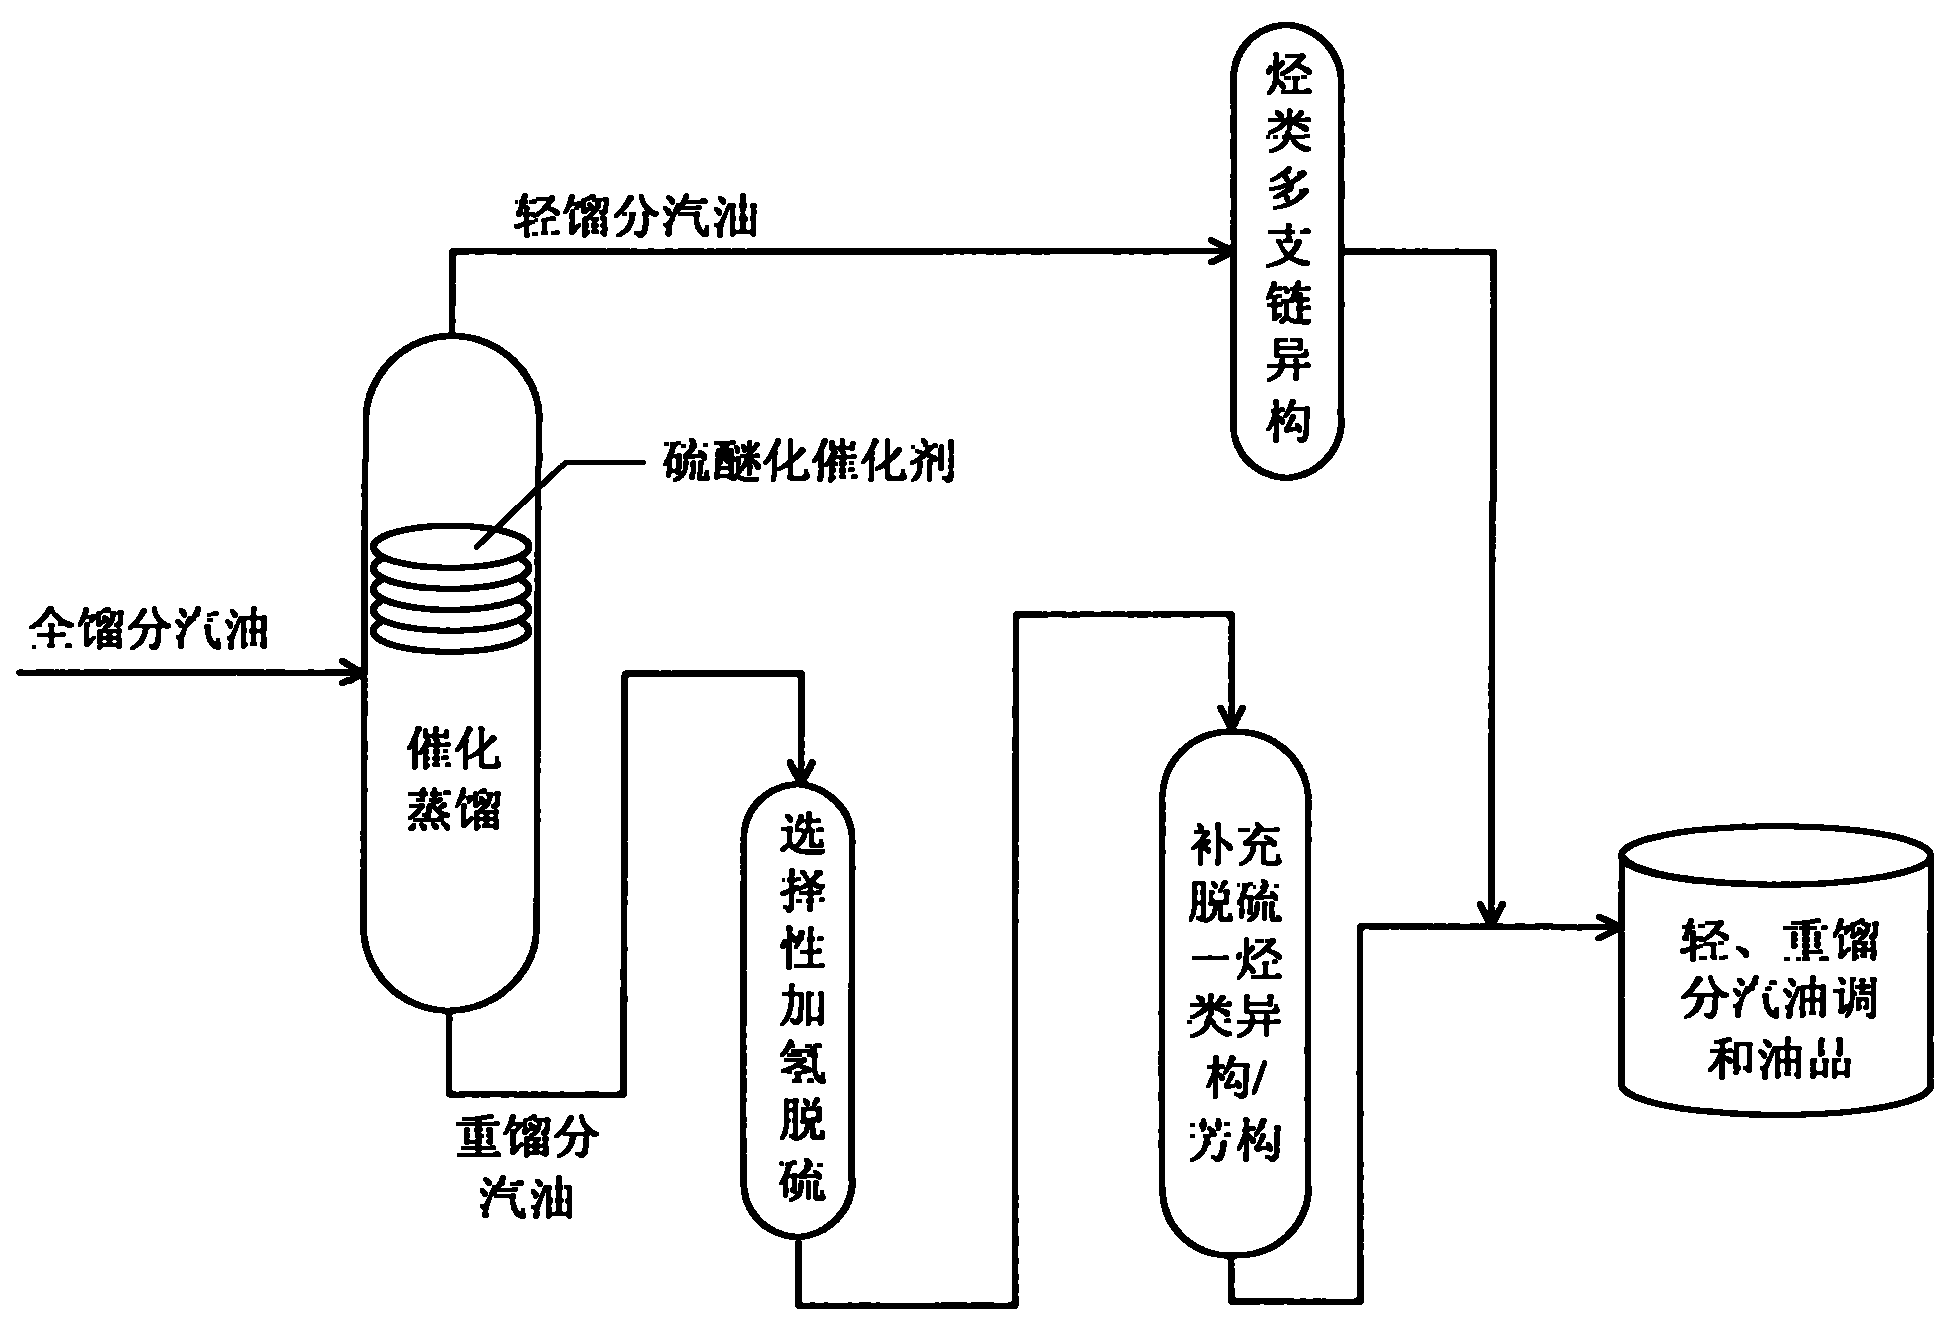 Production method for ultra-low sulfur and high-octane number gasoline